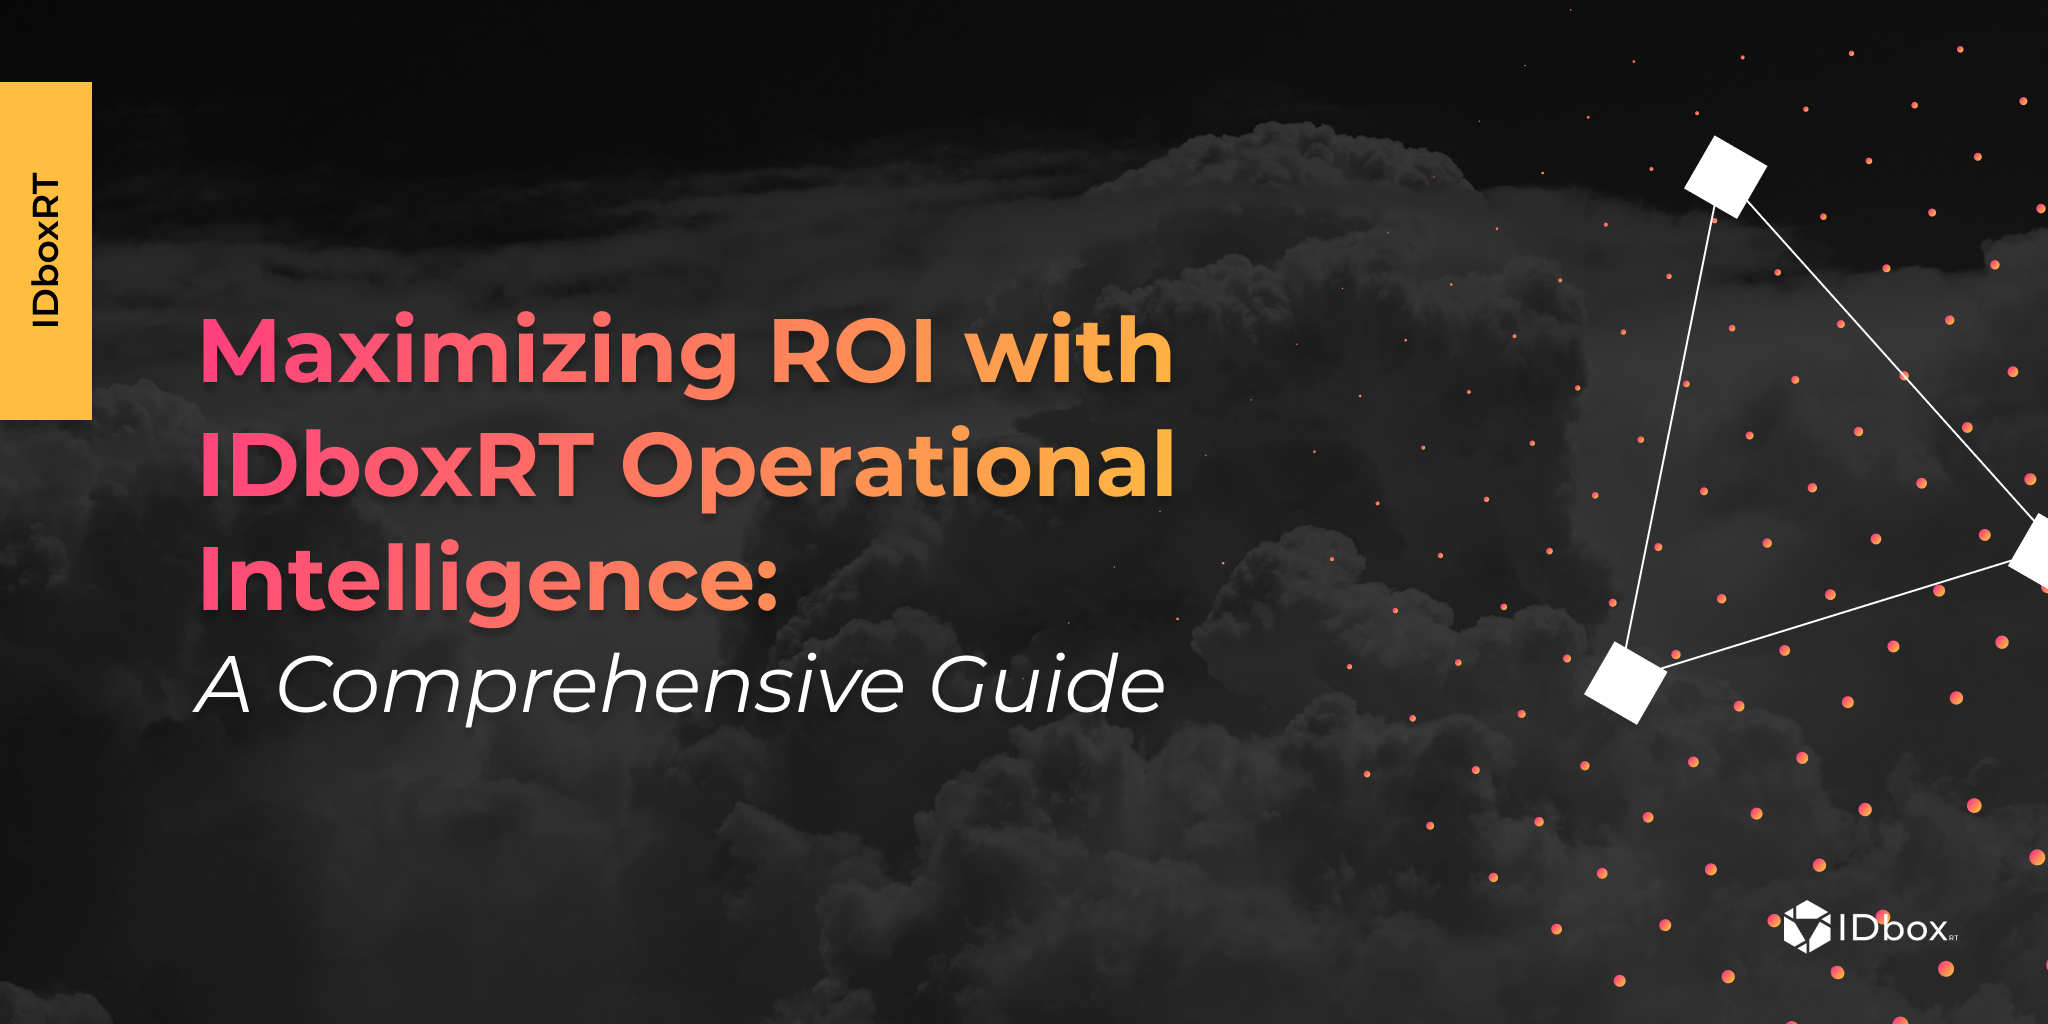 Guide to maximize ROI with IDboxRT Operational Intelligence